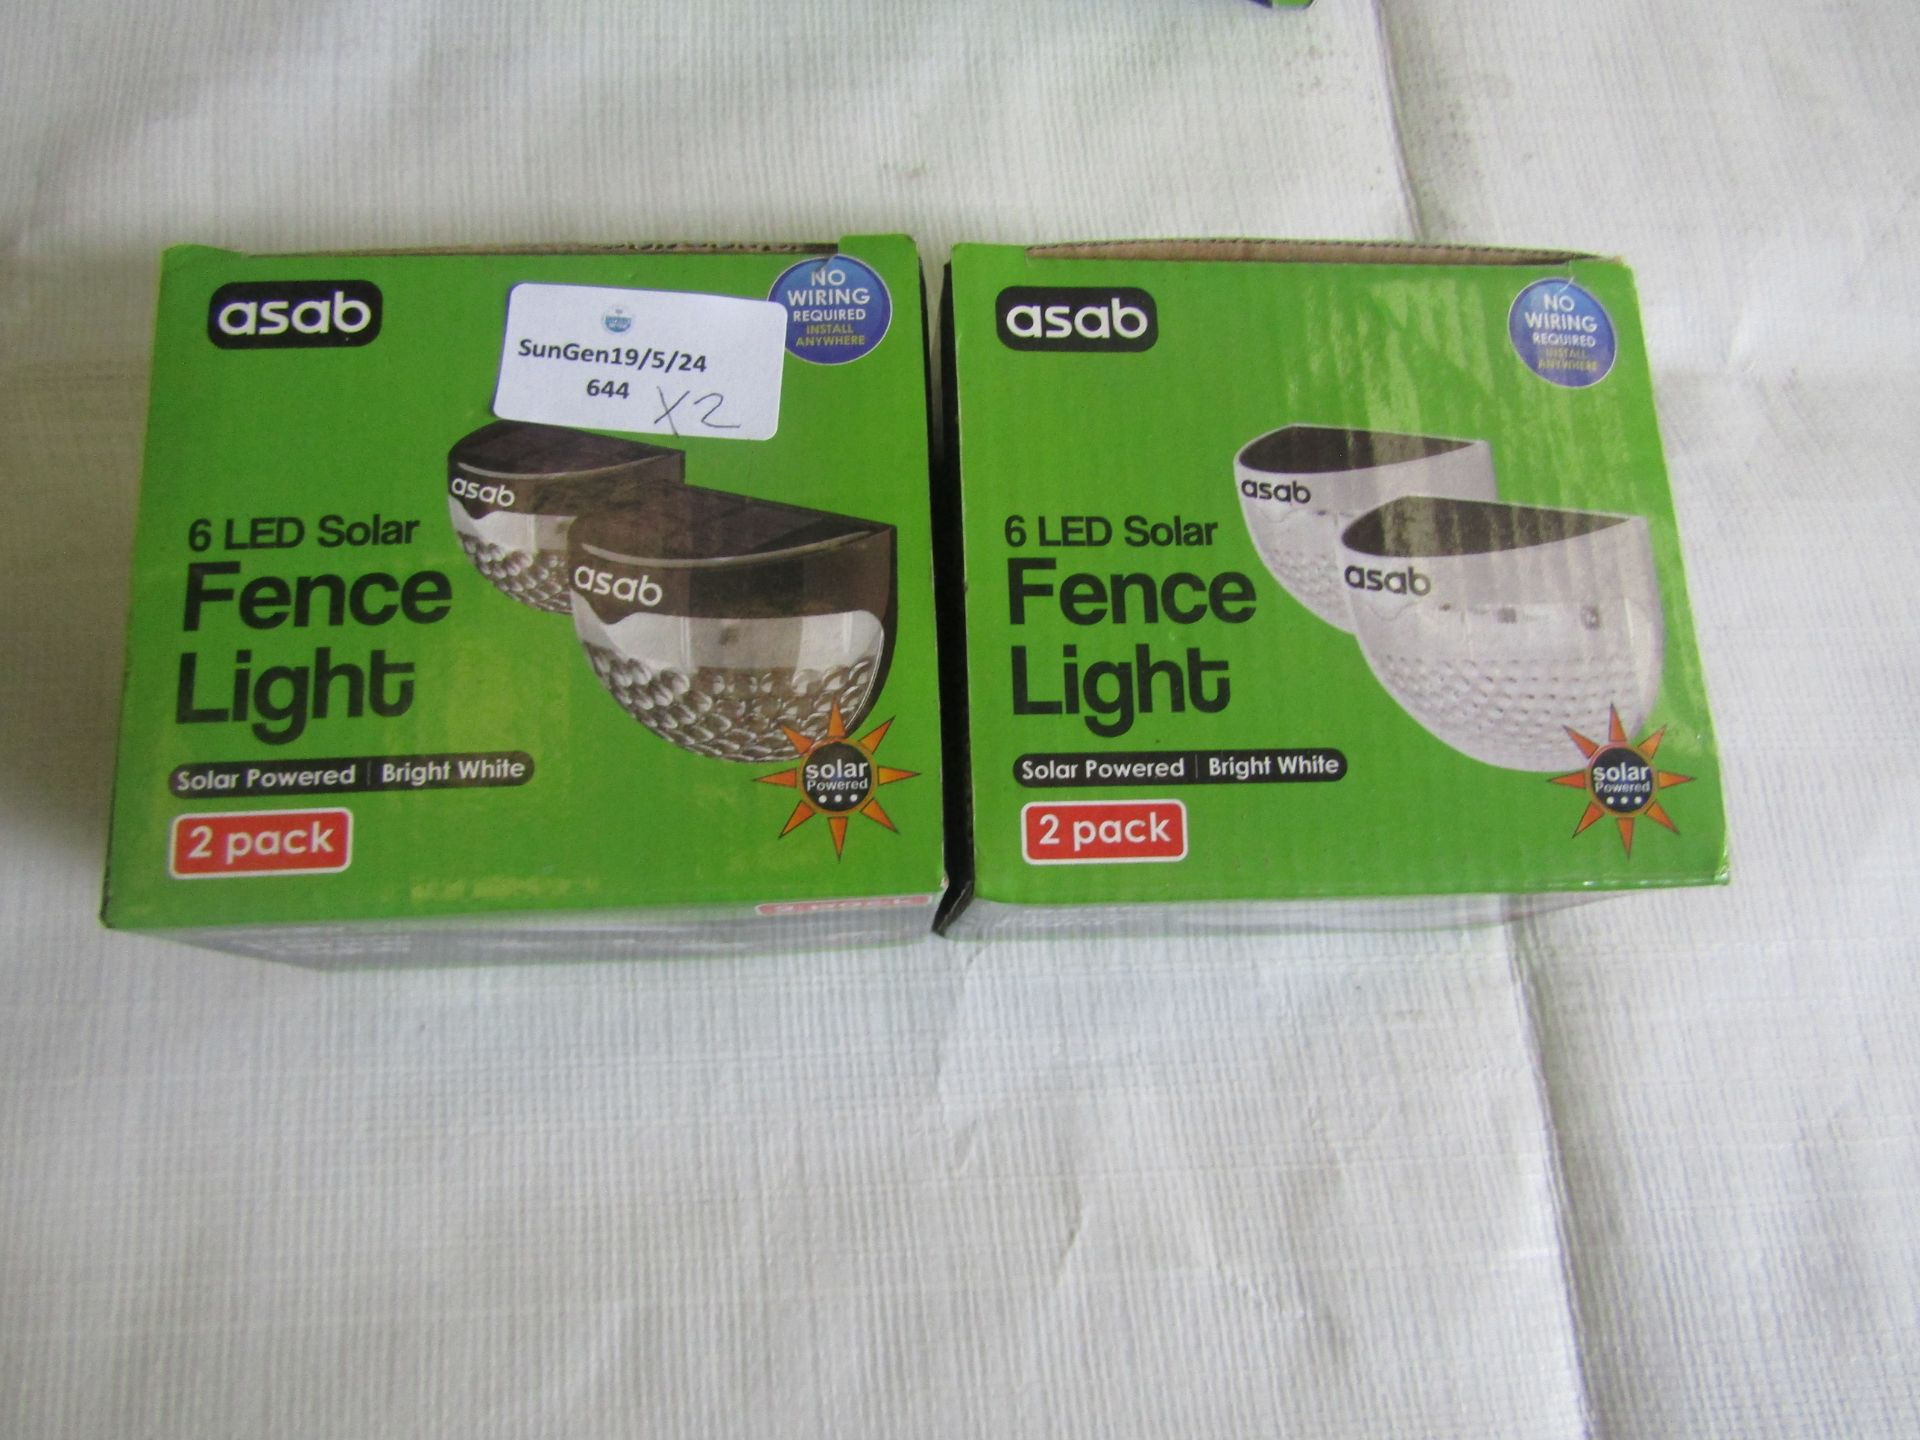 2x Asab 2 Pack 6 LED Solar Fence Lights Bright White, One White & One Black - Both Unchecked &